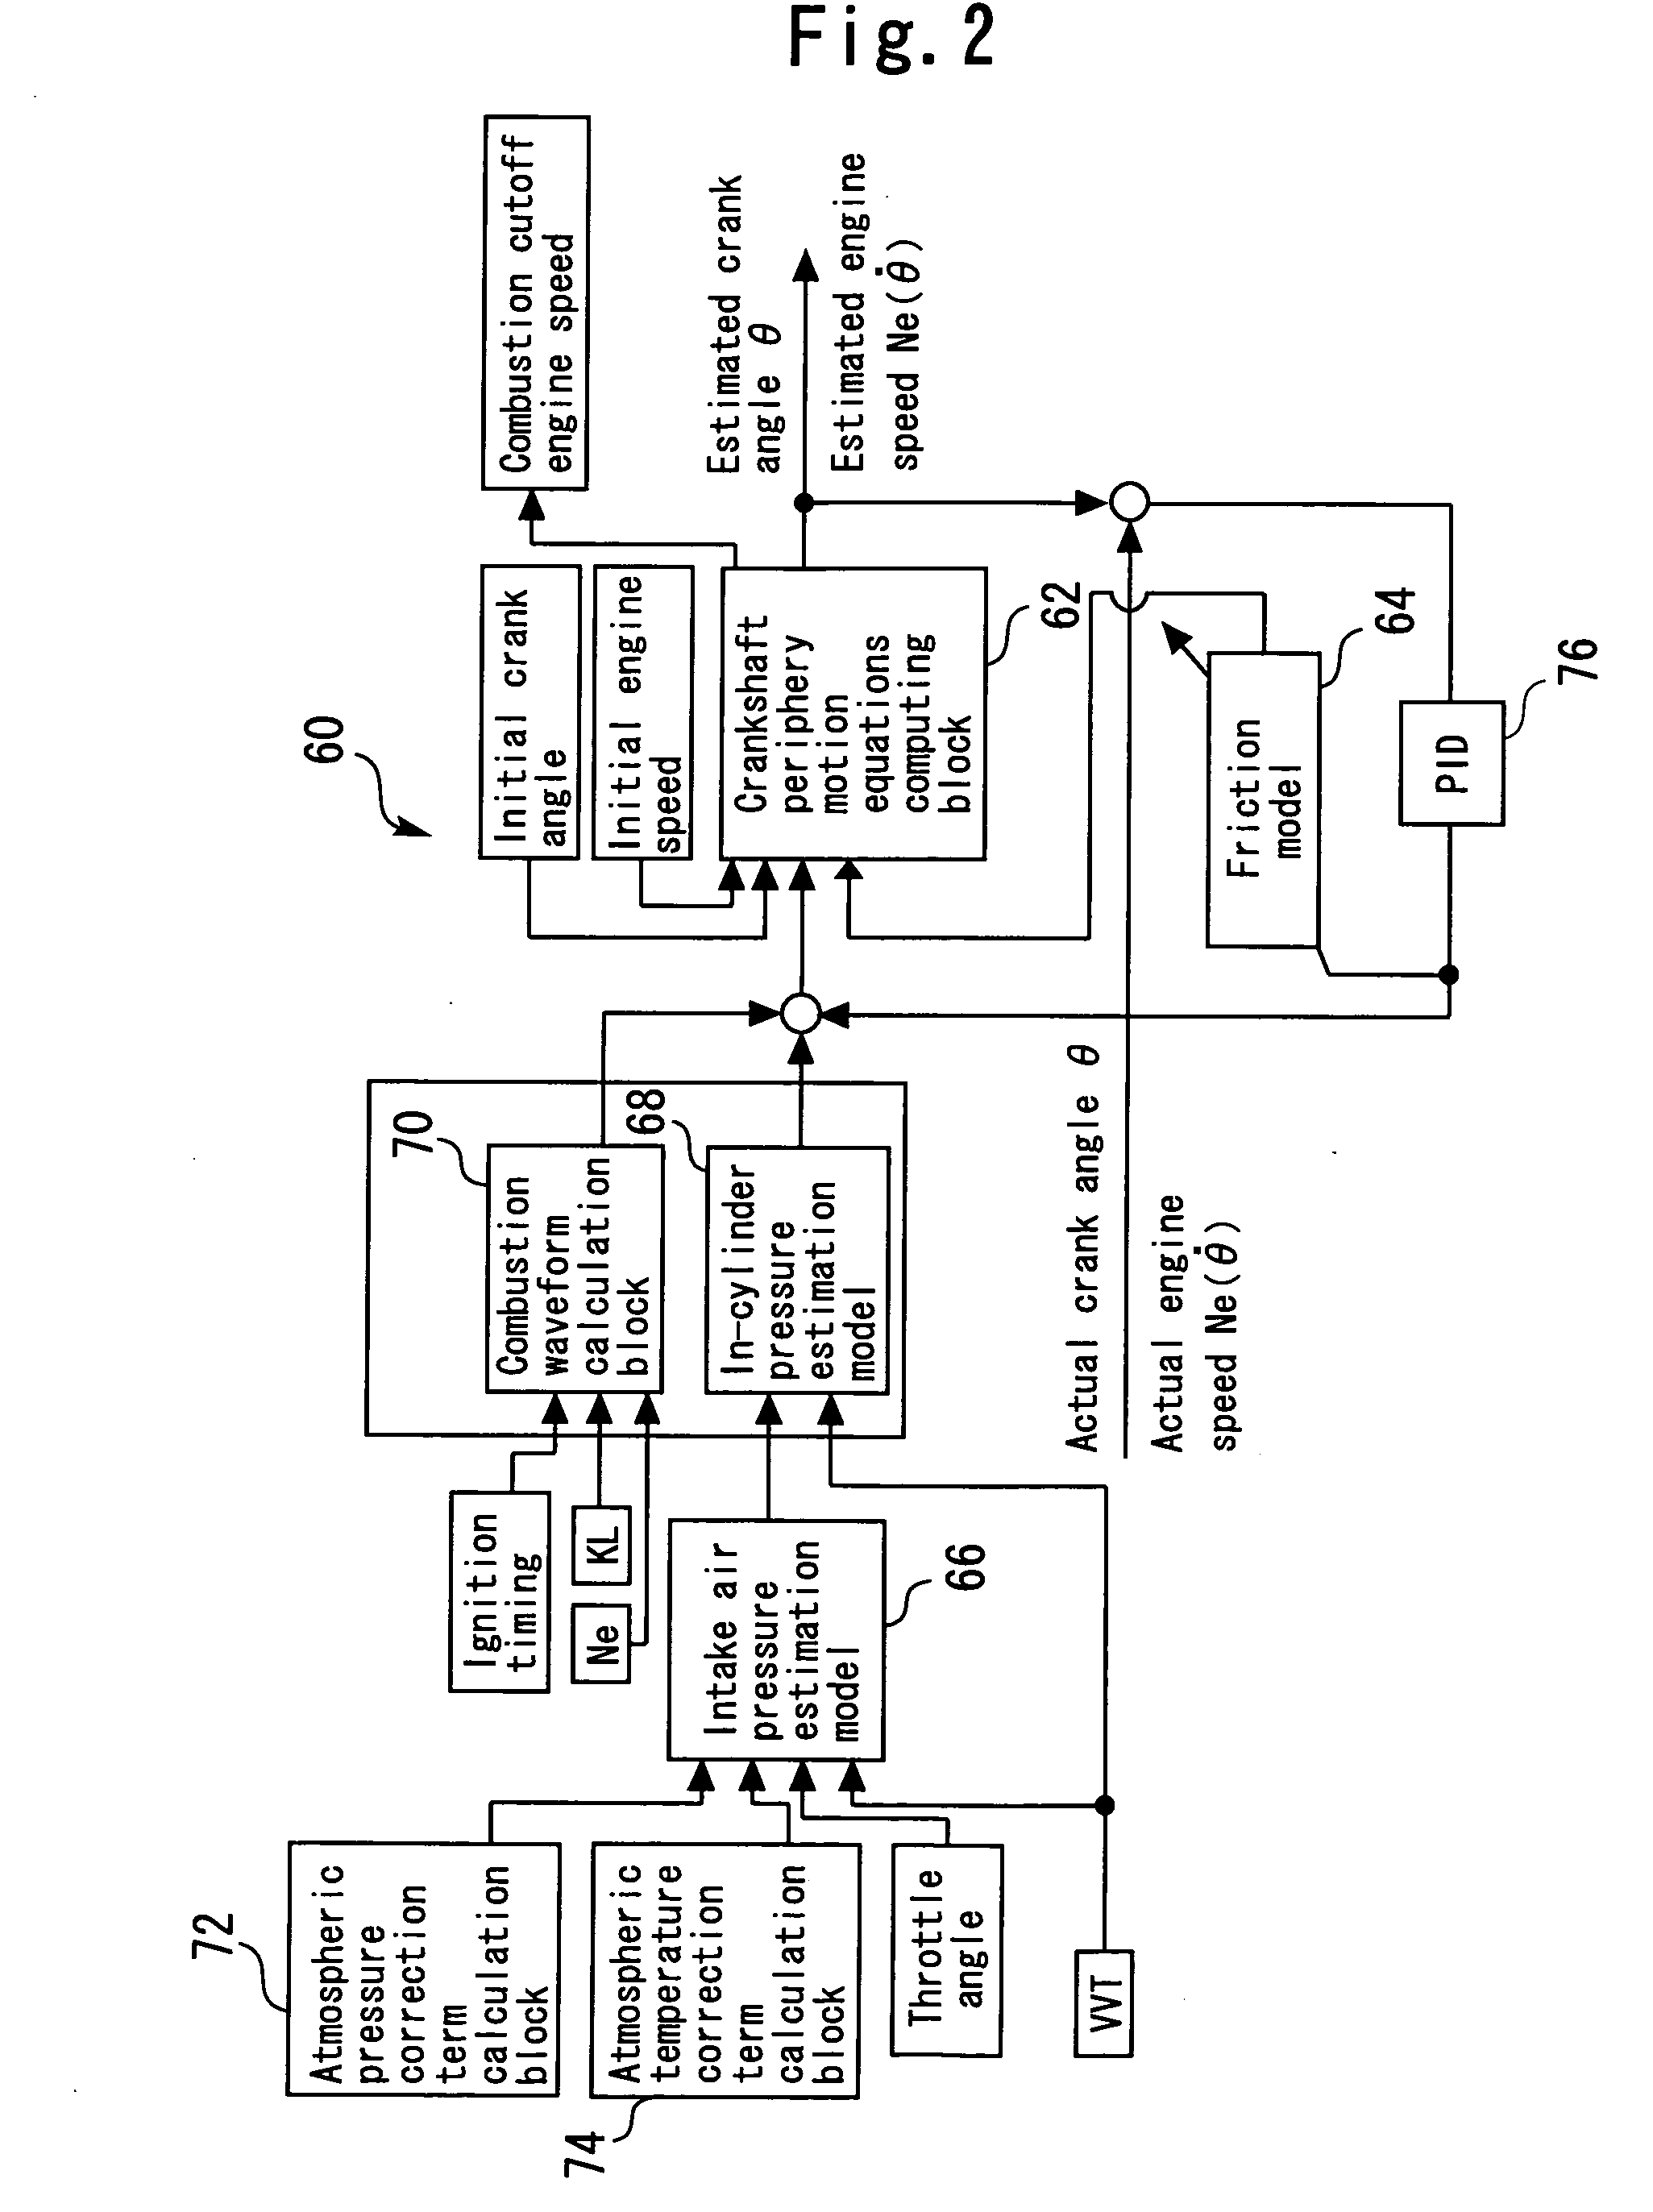 Stop Position Control Apparatus for Internal Combustion Engine